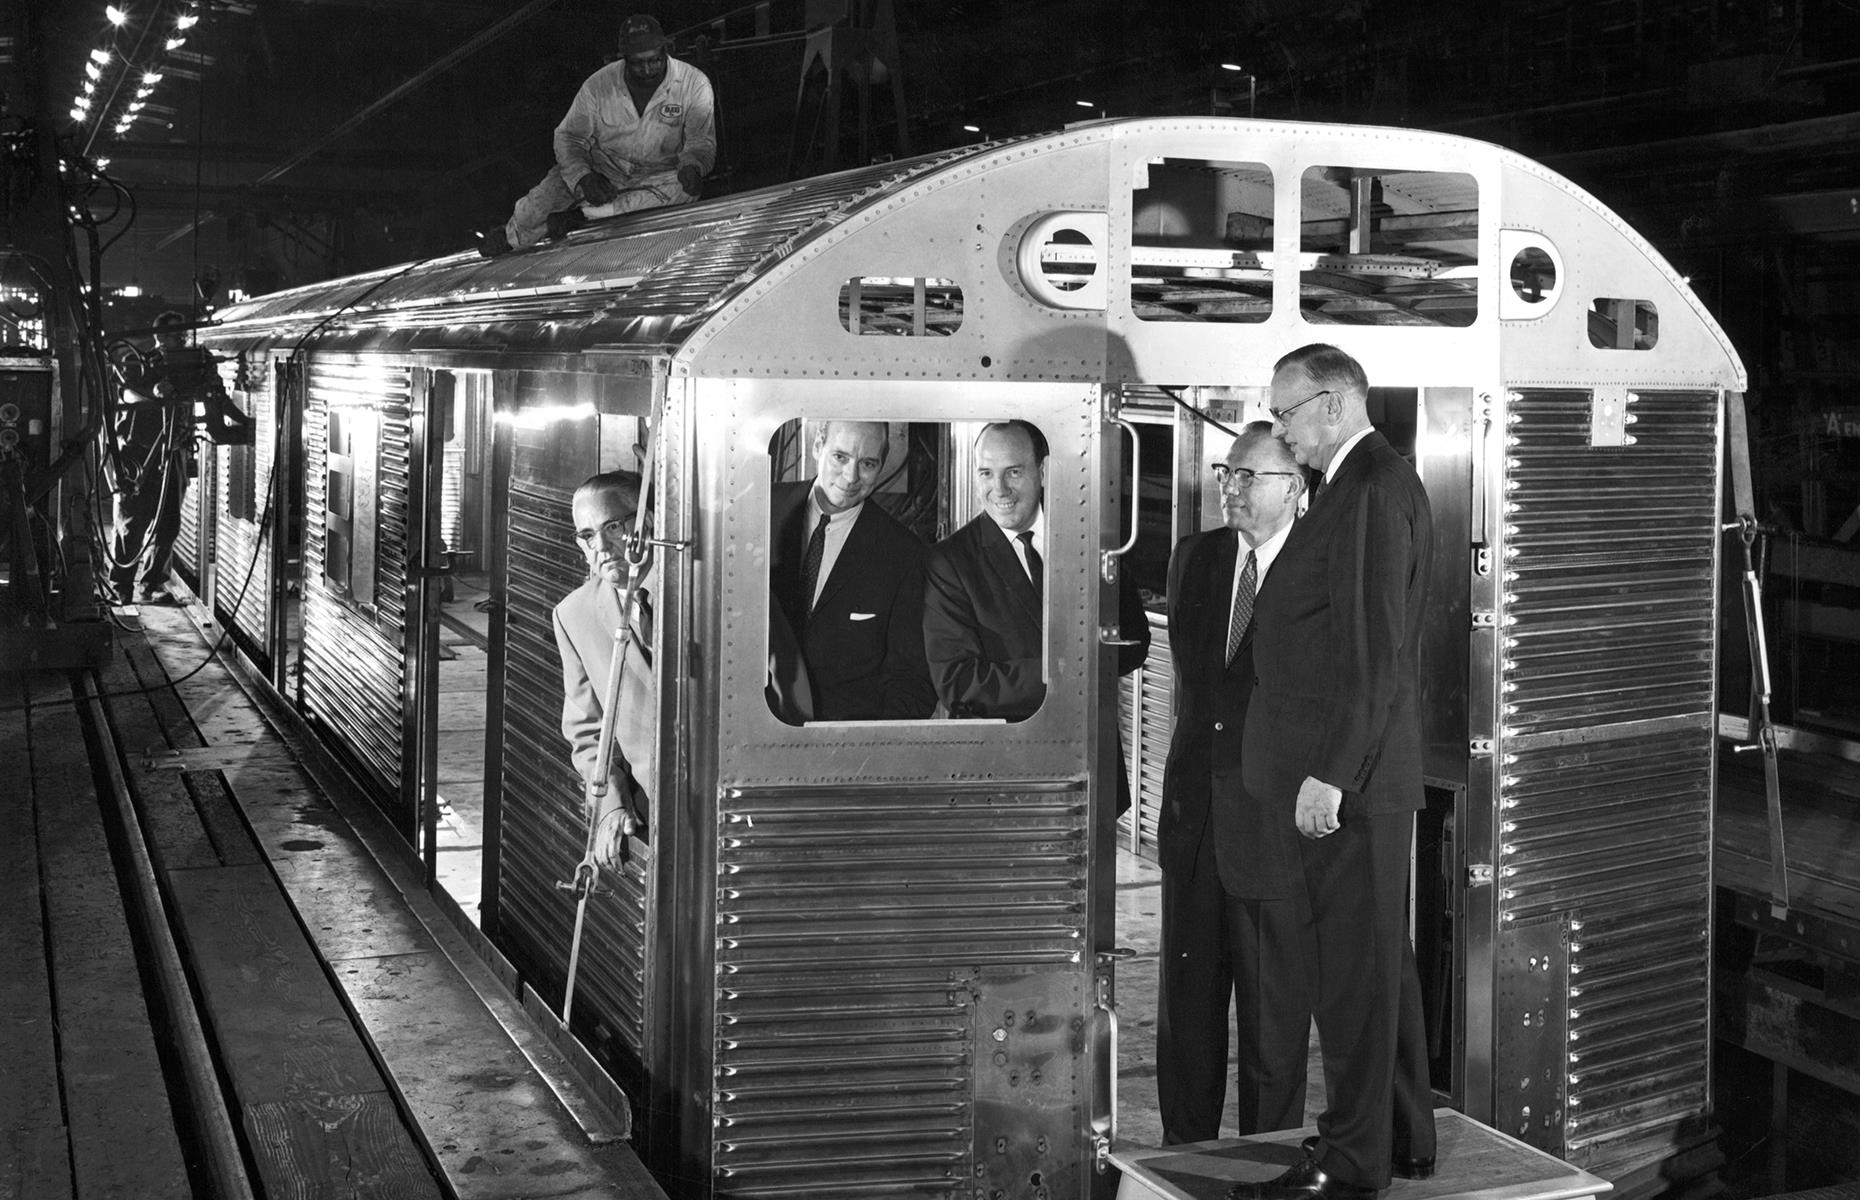 <p>The oldest cars still in operation on the New York City Subway are the R32 'Brightliners', which were introduced in 1964. This photograph shows New York City Transit Authority officials checking out the new cars at the Budd Company Railway Division plant in Philadelphia, prior to their launch.</p>  <p><strong><a href="https://www.loveexploring.com/galleries/110194/then-and-now-incredible-images-of-americas-cities">Then and now: incredible photos of America's cities</a></strong></p>